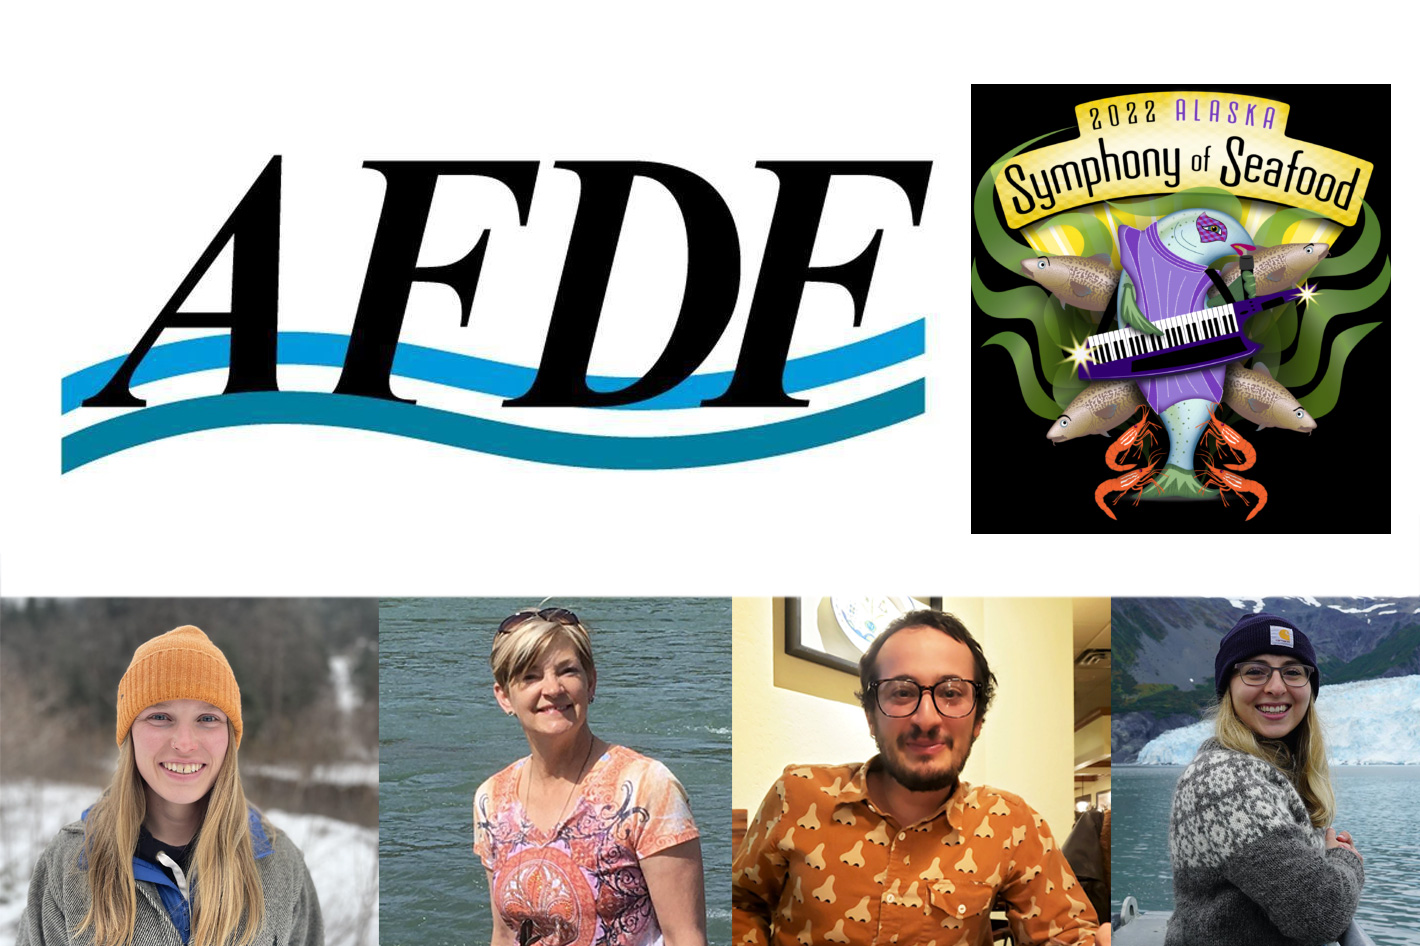 AFDF hires new staff, grows organizational capacity